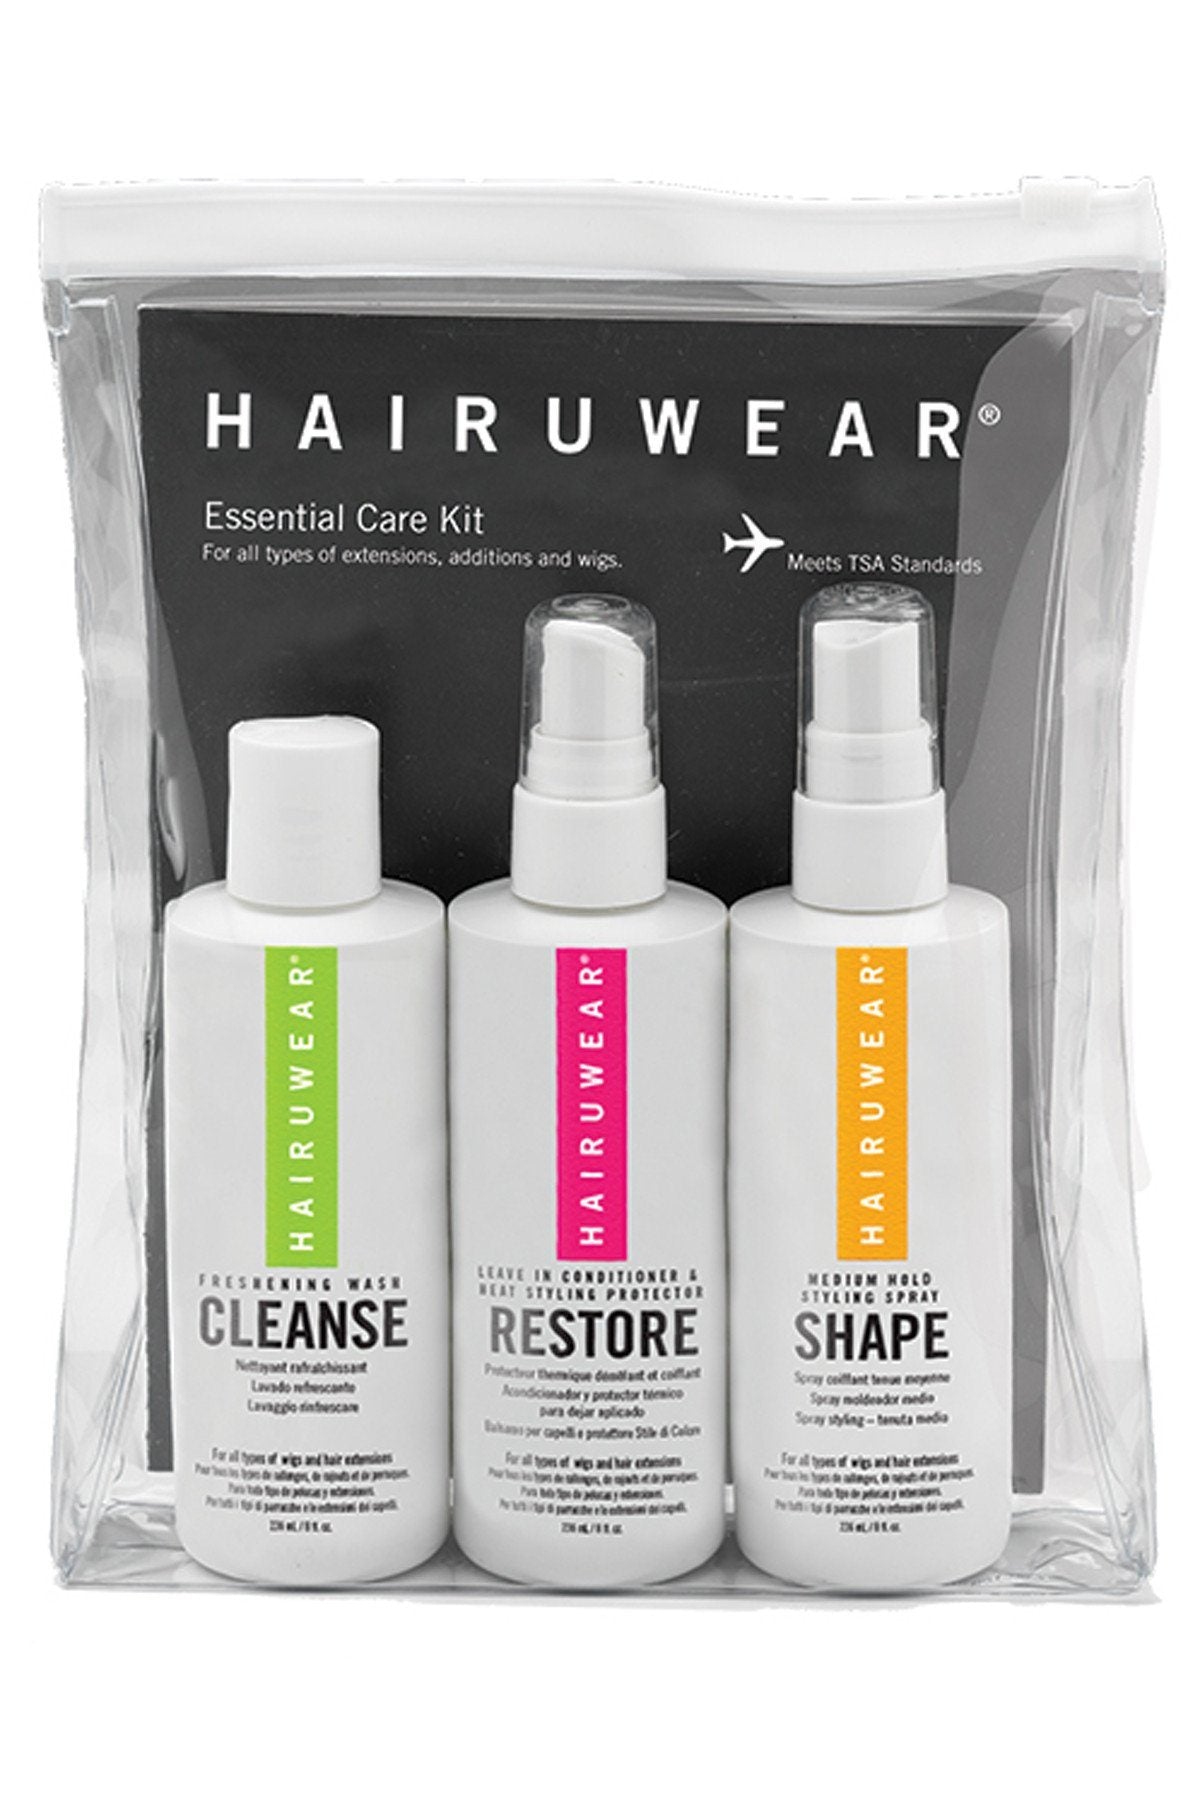 WIG CARE KIT, Wigs for Women